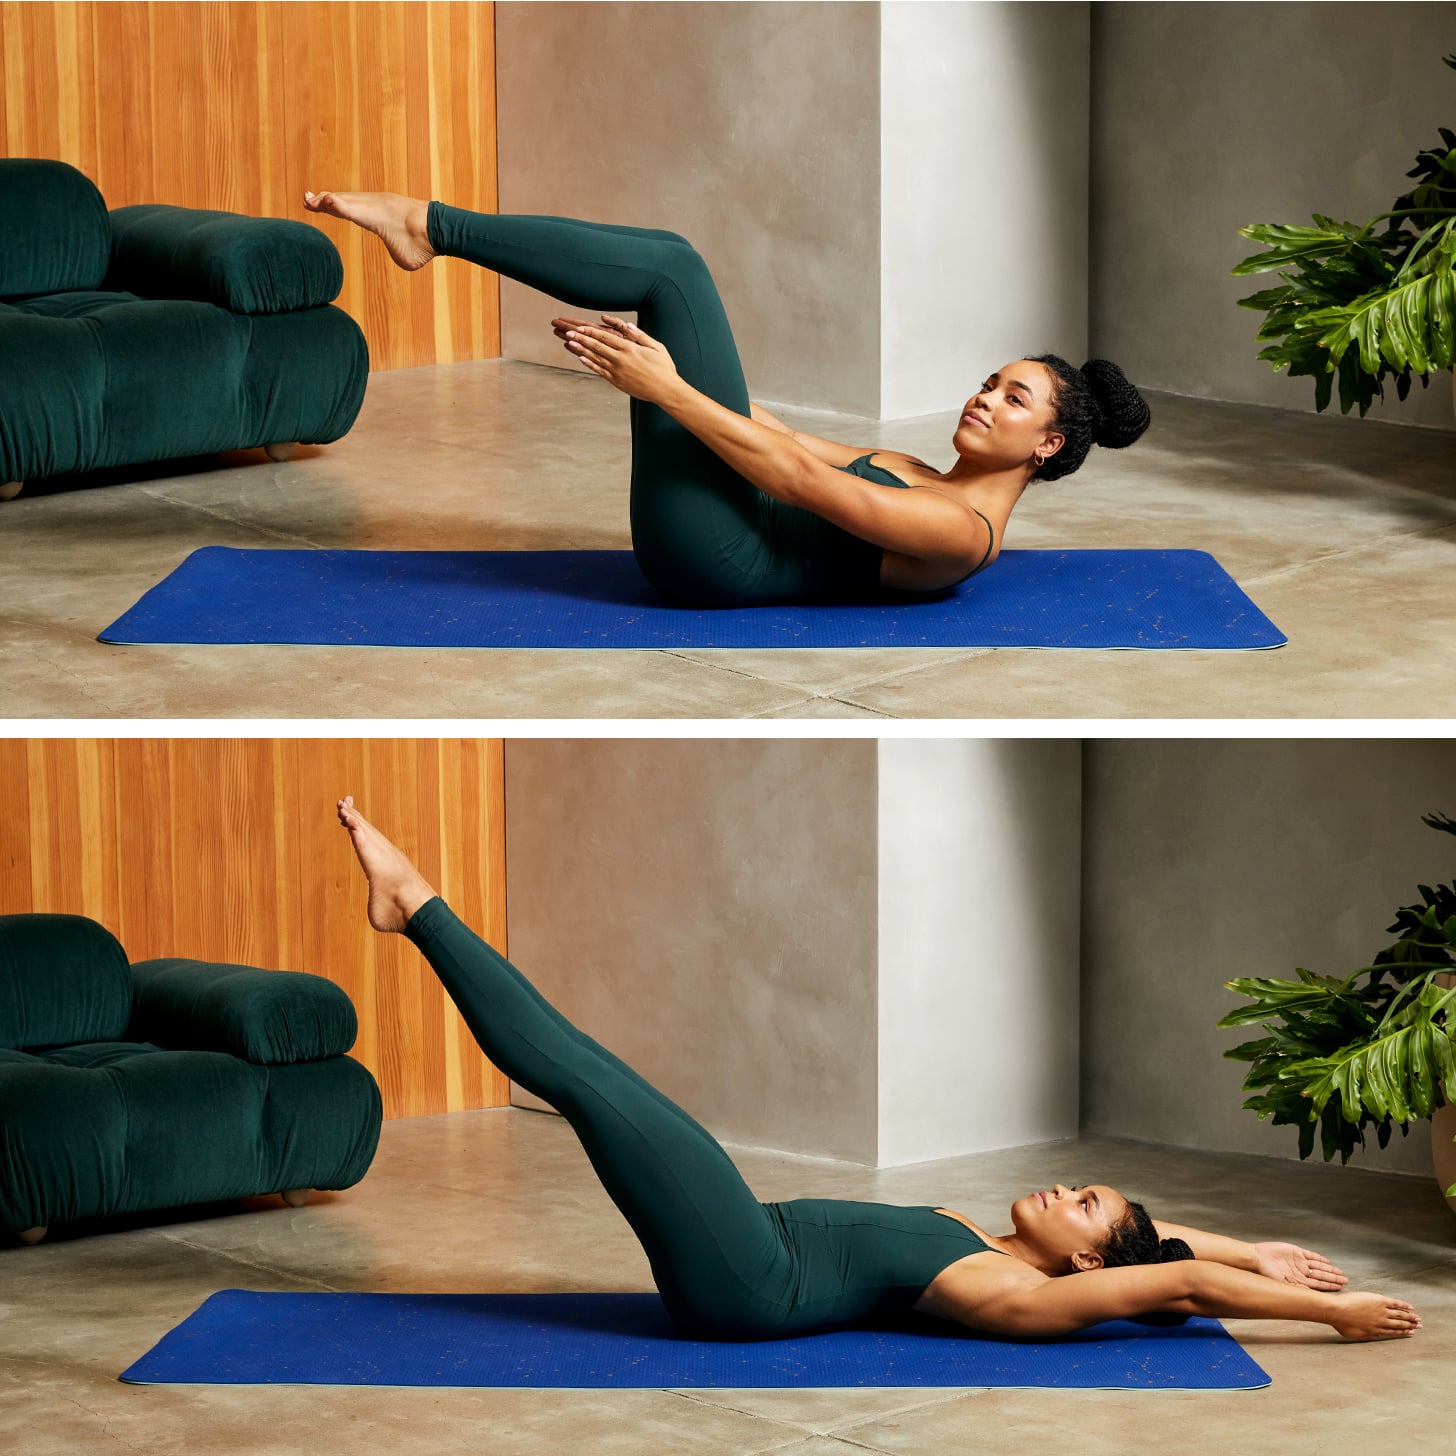 Double Leg Stretch - Abdominal Exercises for Core Stabilization